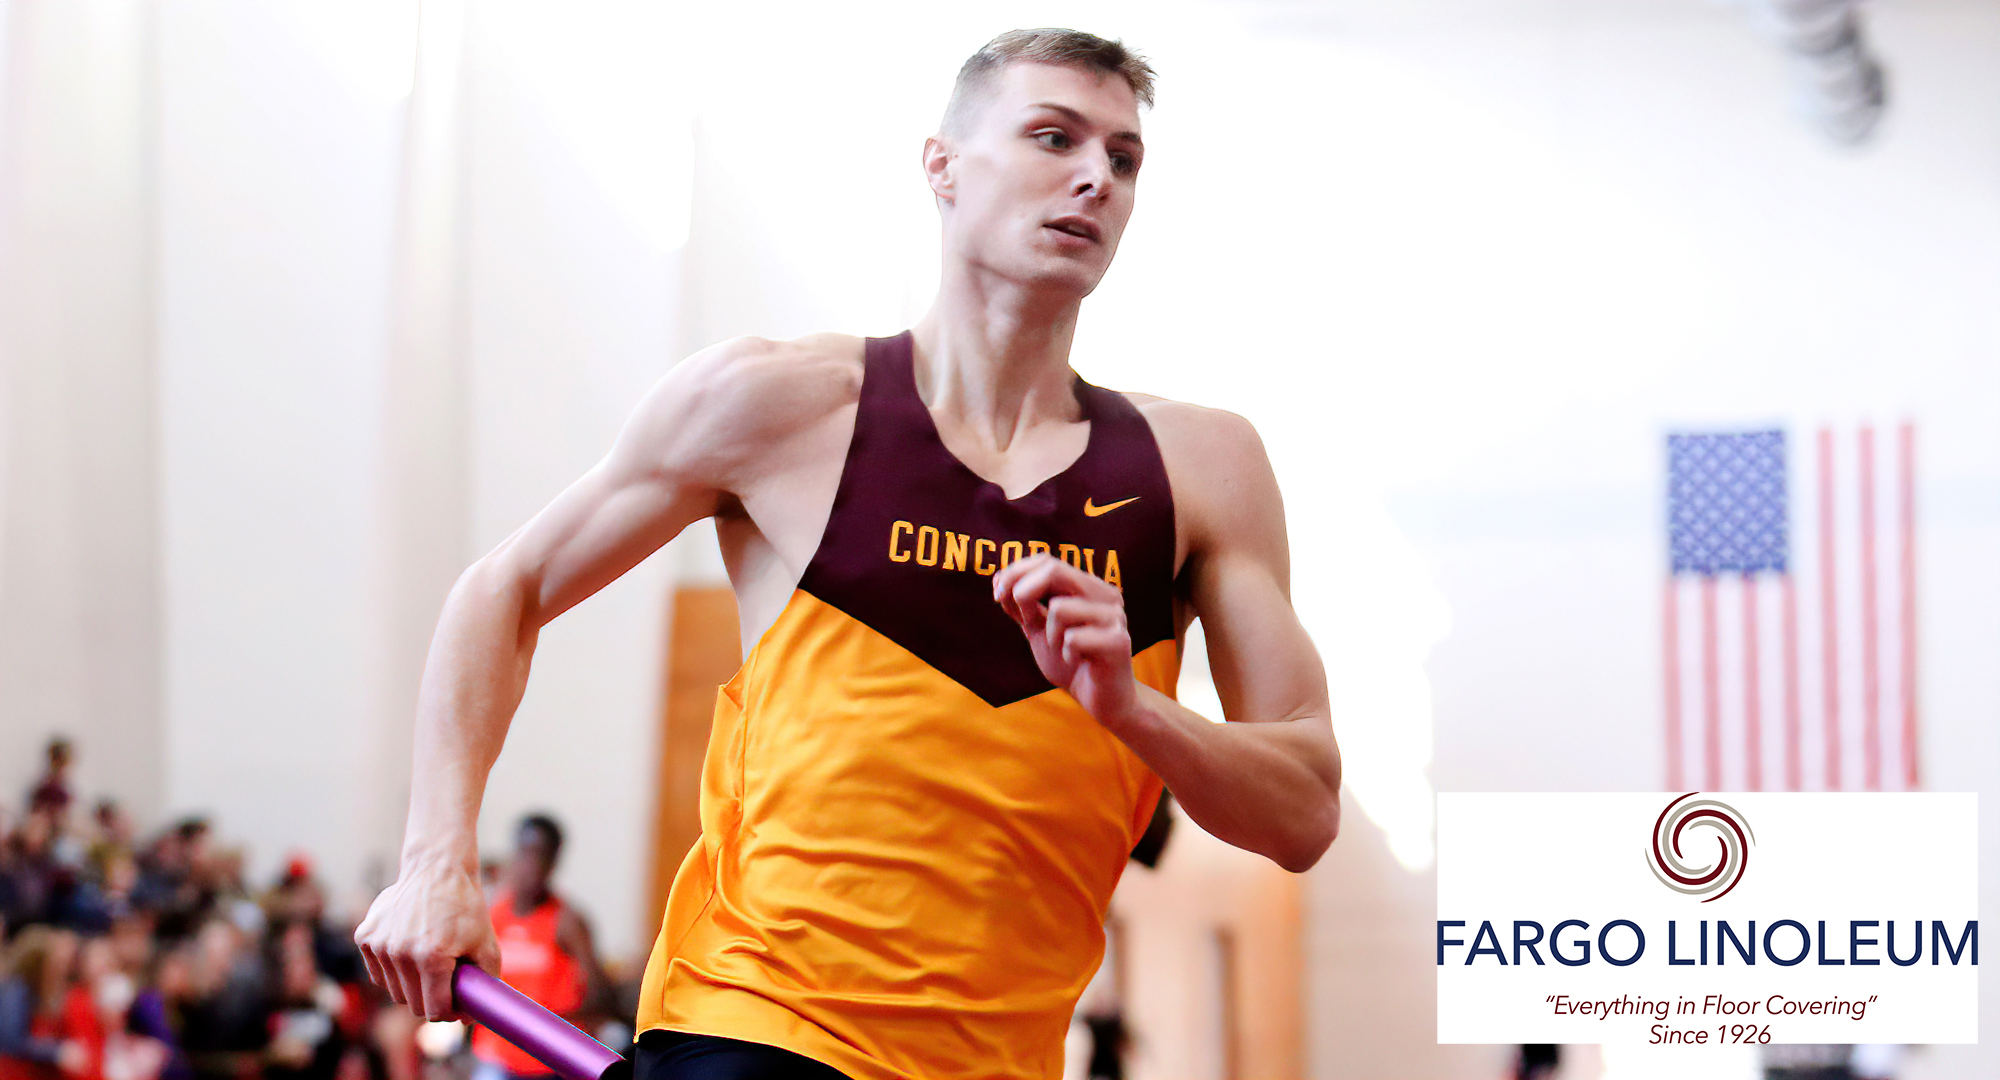 Junior Cal Wright was one of three event winners for the Cobbers at the St. John's dual meet. He won the 300 meters with a time just off his own school record.